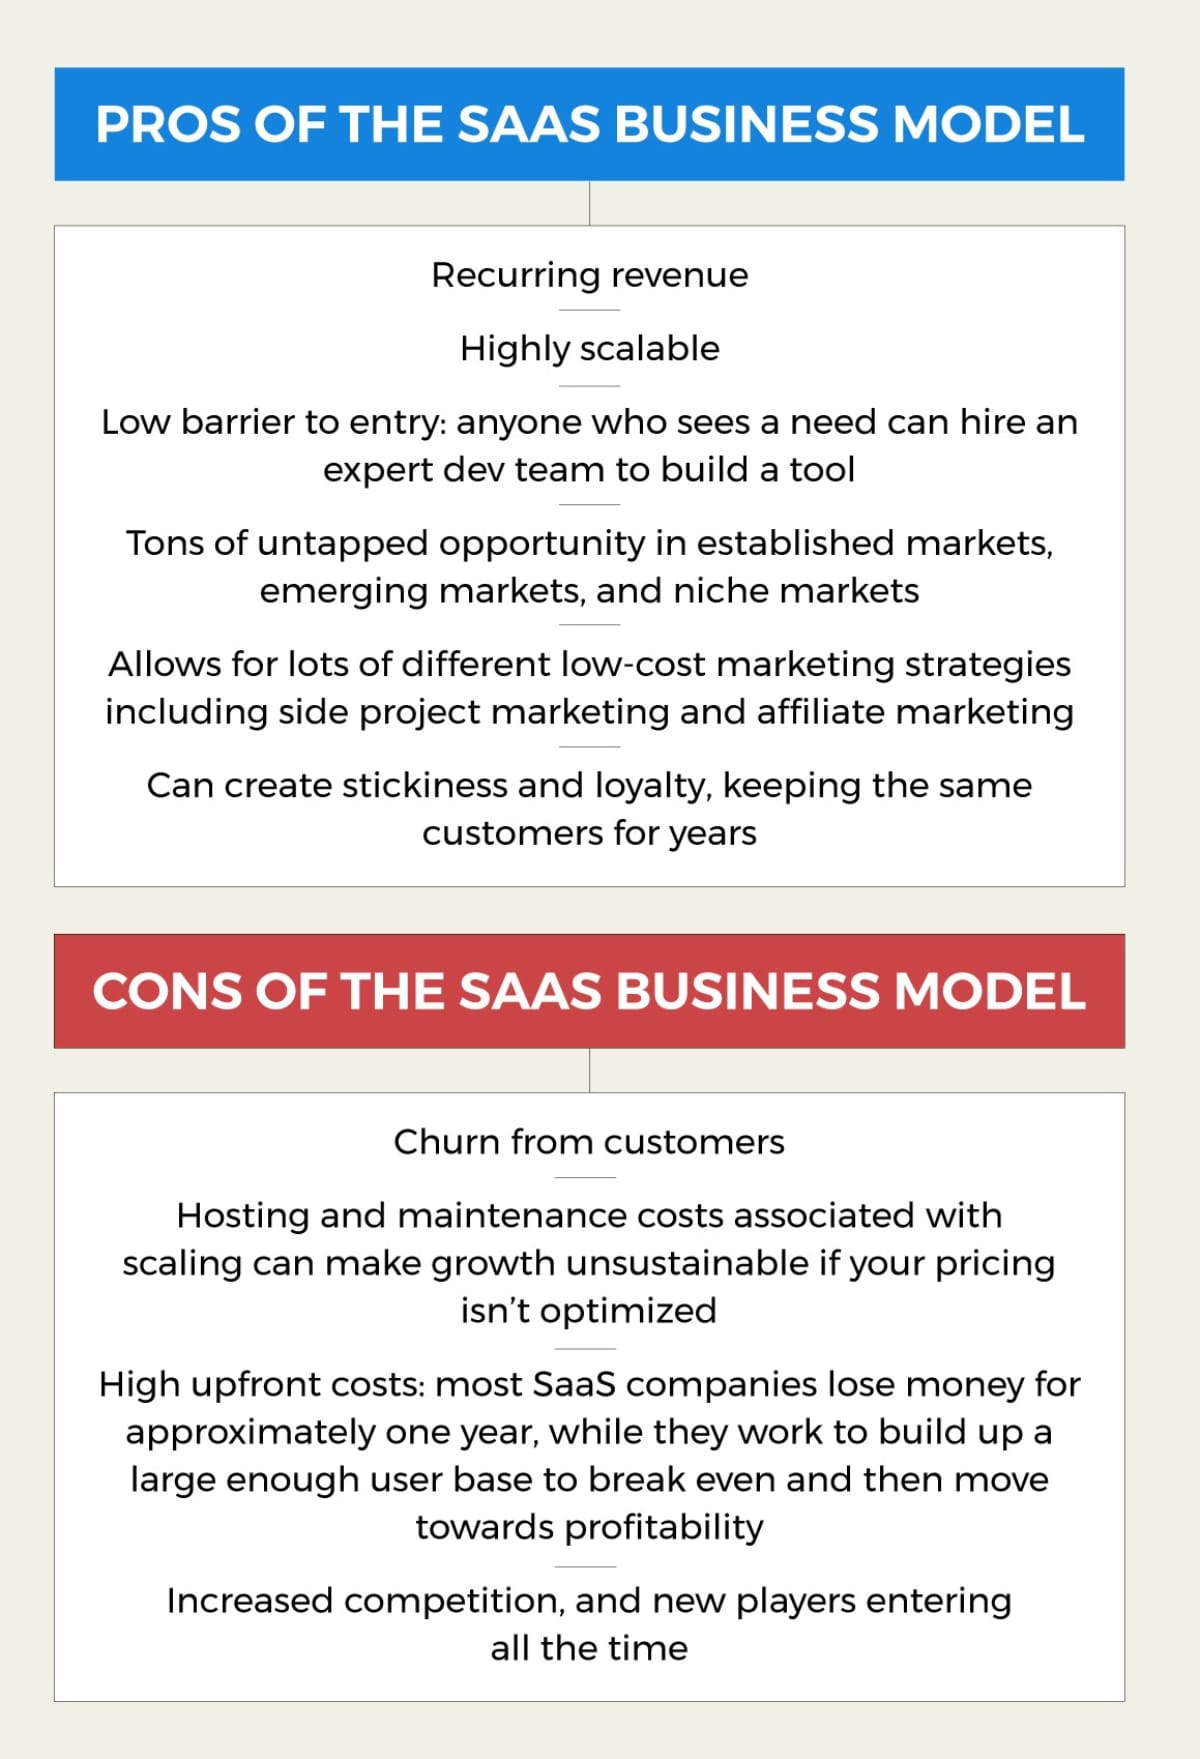 Cosmico - SaaS Pros and Cons